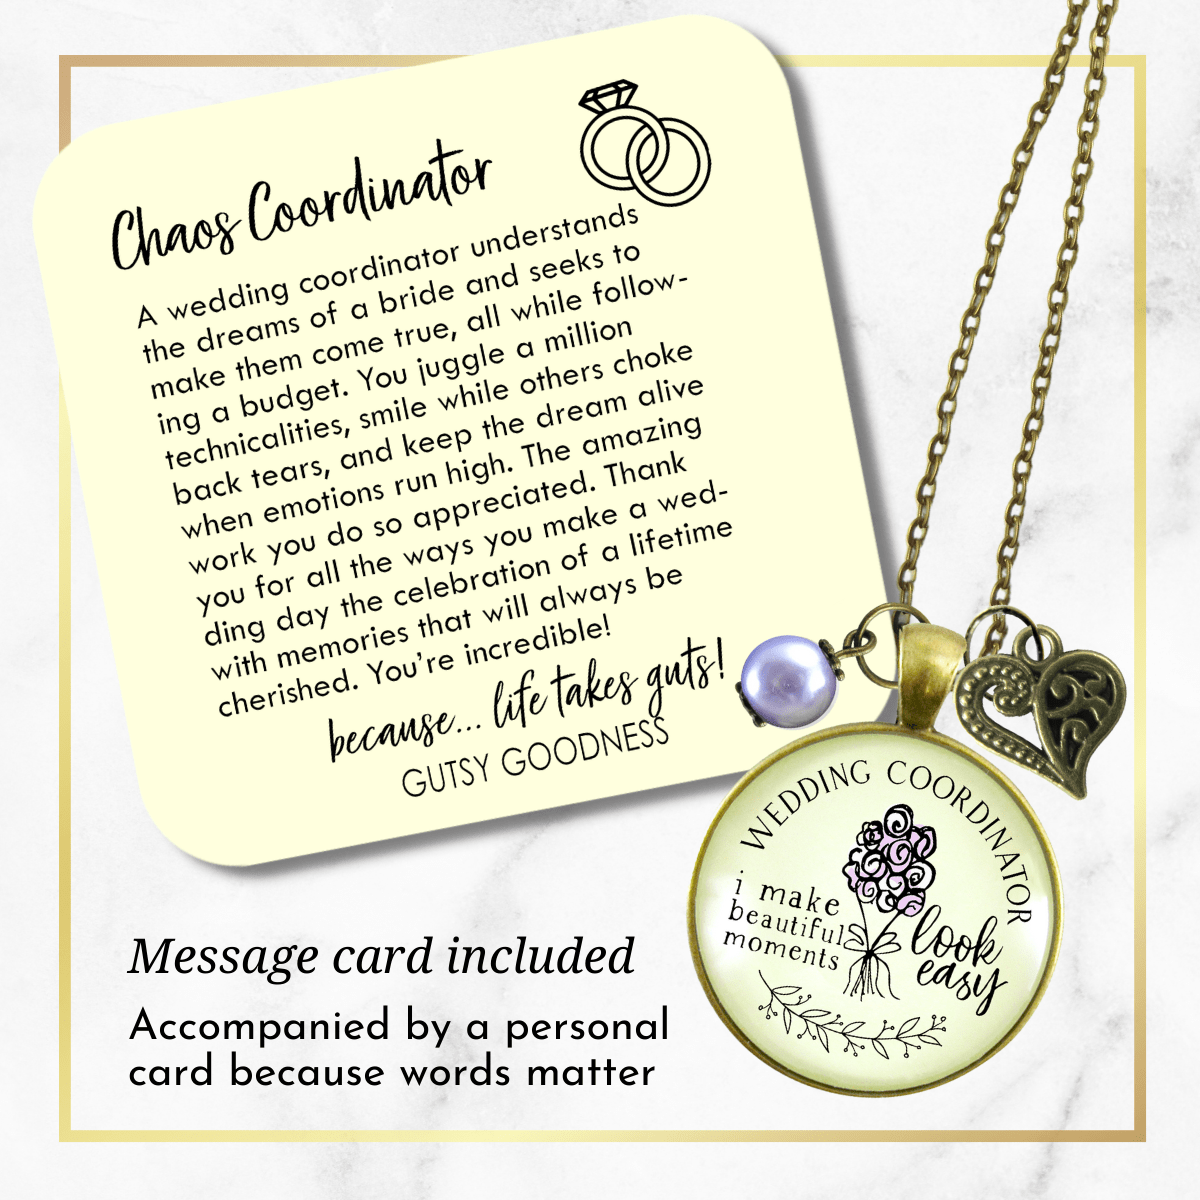 Gutsy Goodness Wedding Coordinator Necklace Beautiful Moment Gift from Bride Groom - Gutsy Goodness Handmade Jewelry;Wedding Coordinator Necklace Beautiful Moment Gift From Bride Groom - Gutsy Goodness Handmade Jewelry Gifts